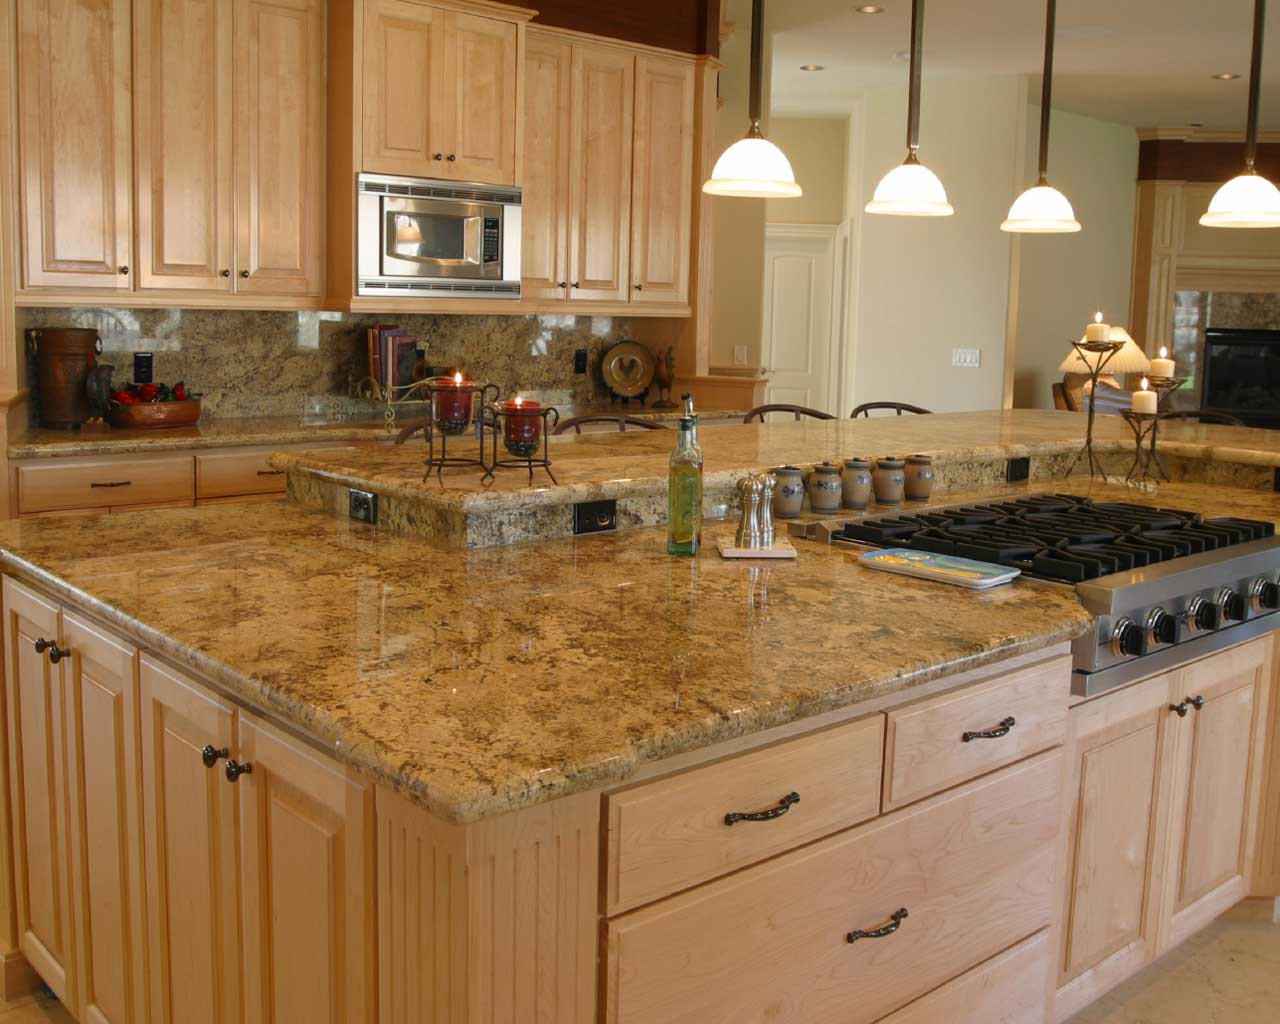 Kitchen Countertops And Cabinets
 Granite Counter Tops for Beautiful Kitchen Island in